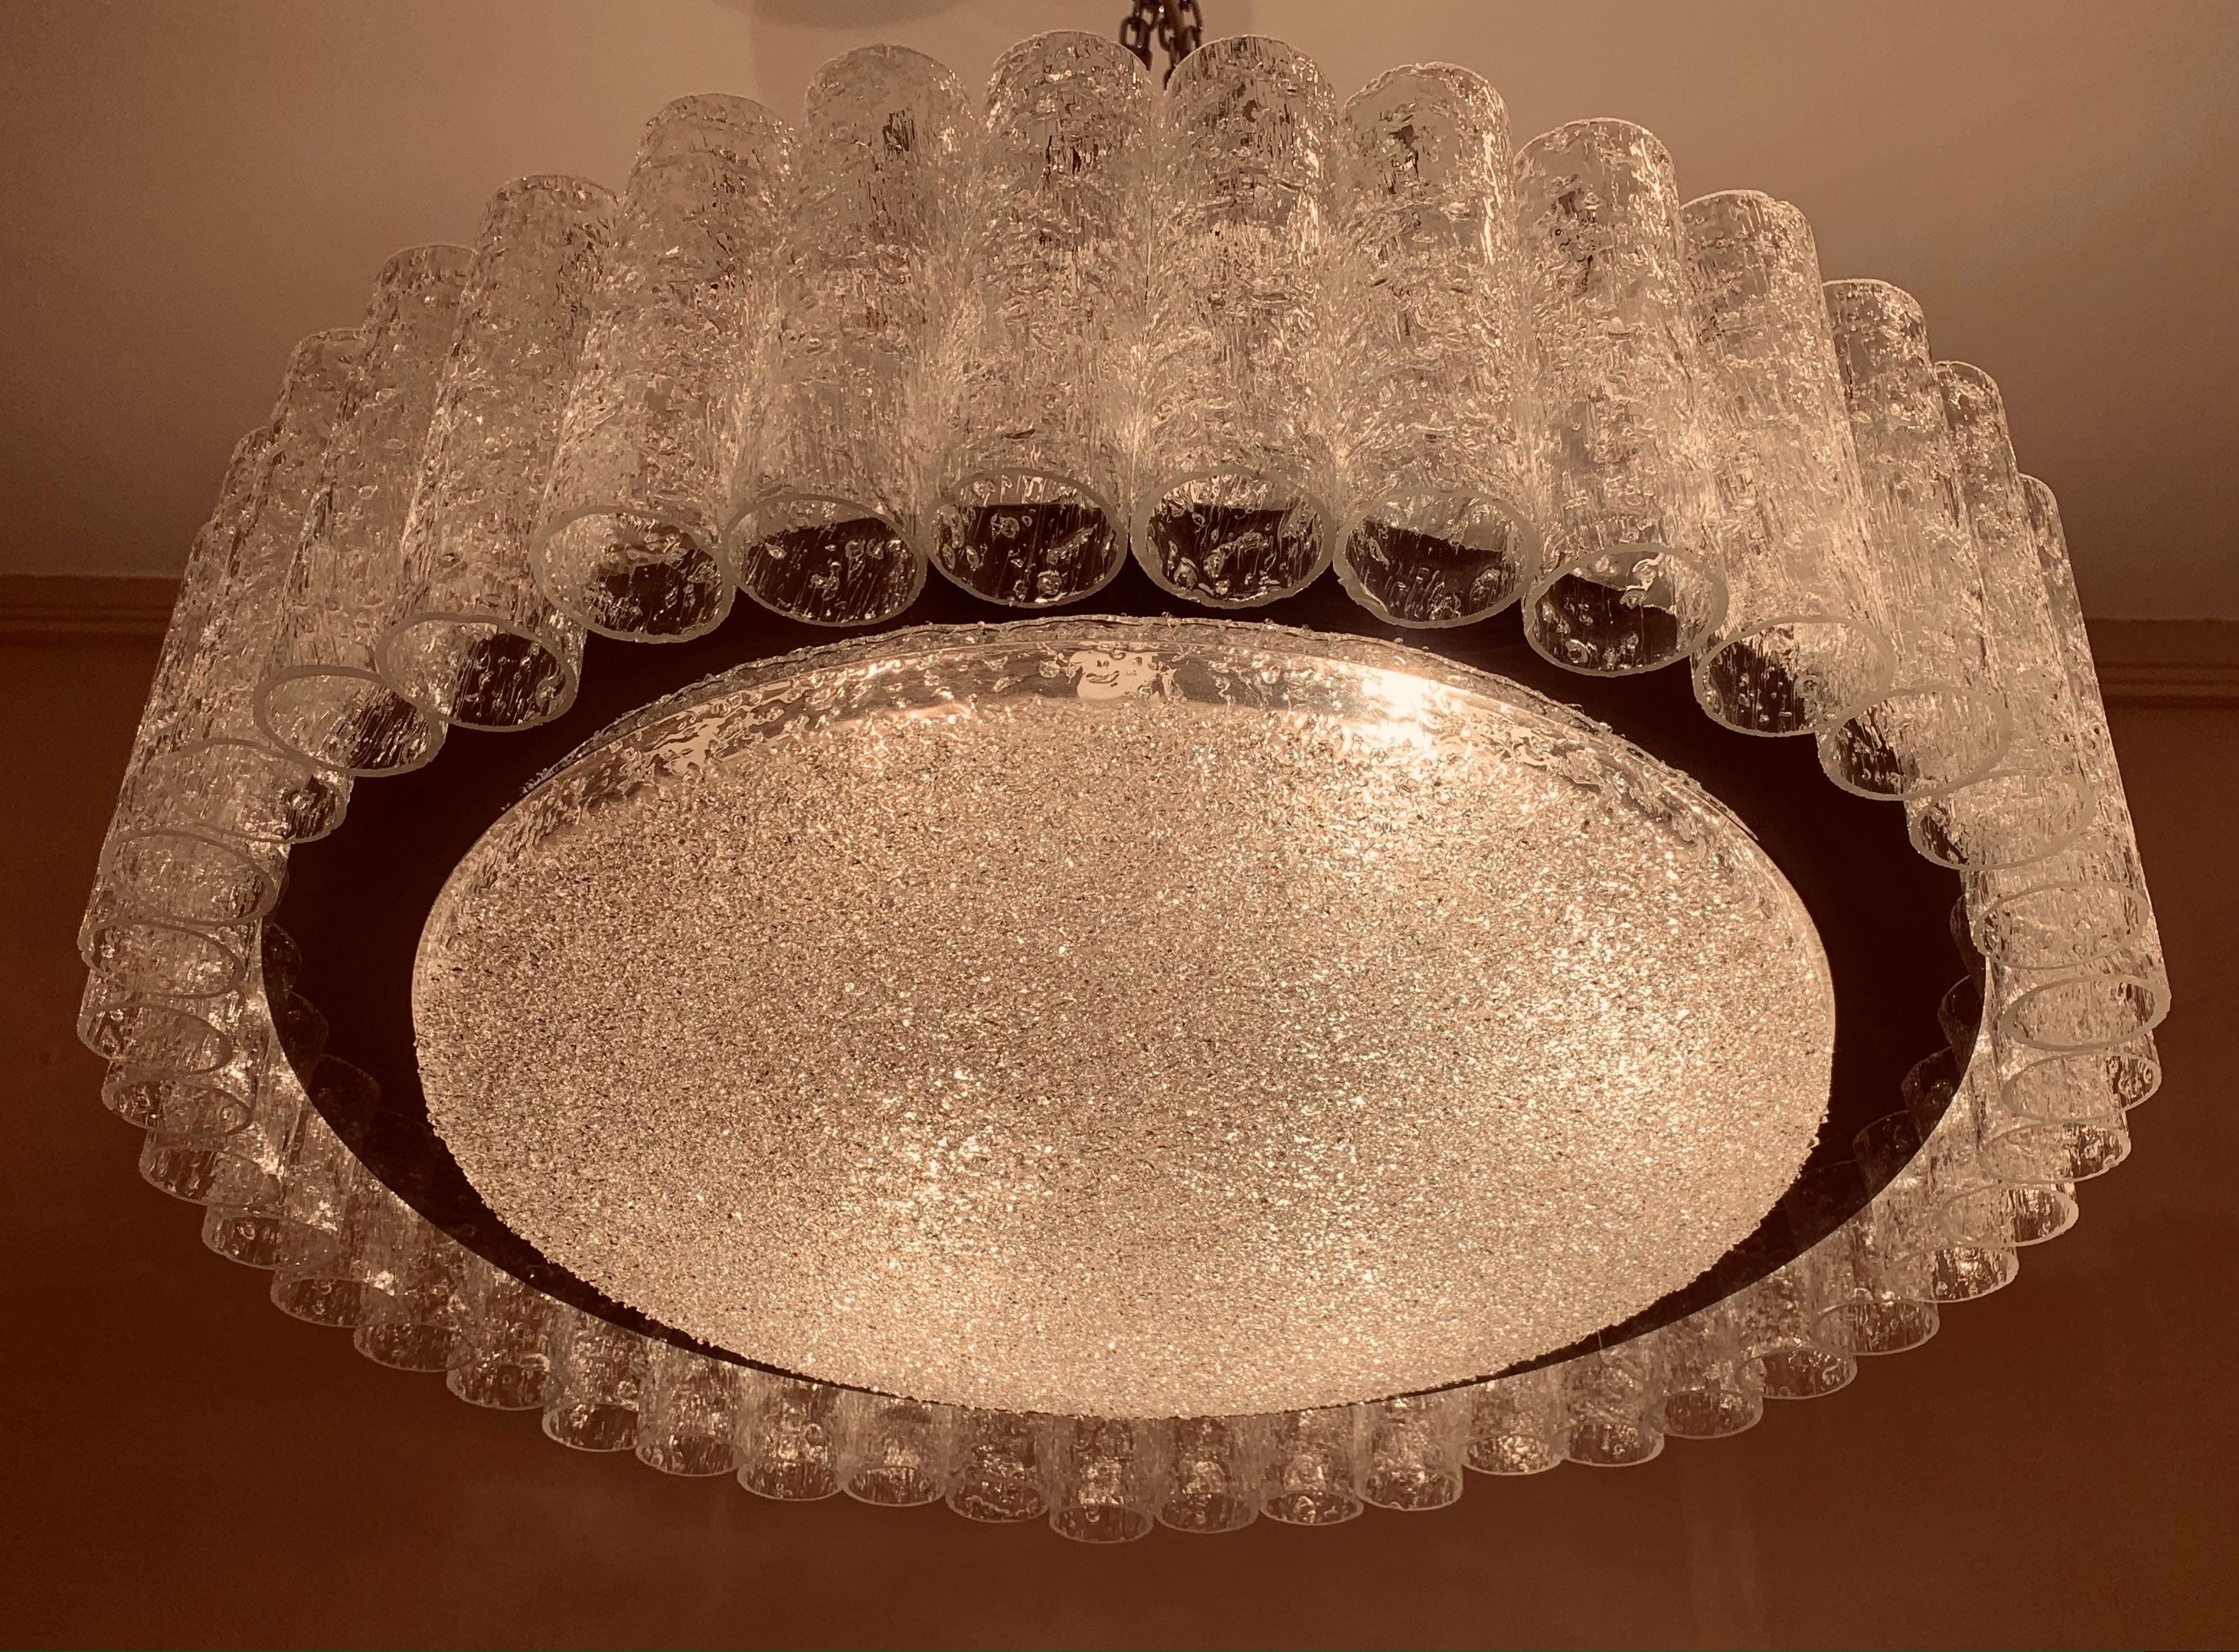 Midcentury, circular, hanging pendant ceiling light, manufactured by Doria Leuchten in Germany during the 1960s. The light features 41 textured, crystal glass tubes, suspended from a chrome and white metal frame, which surround a crystal glass disc